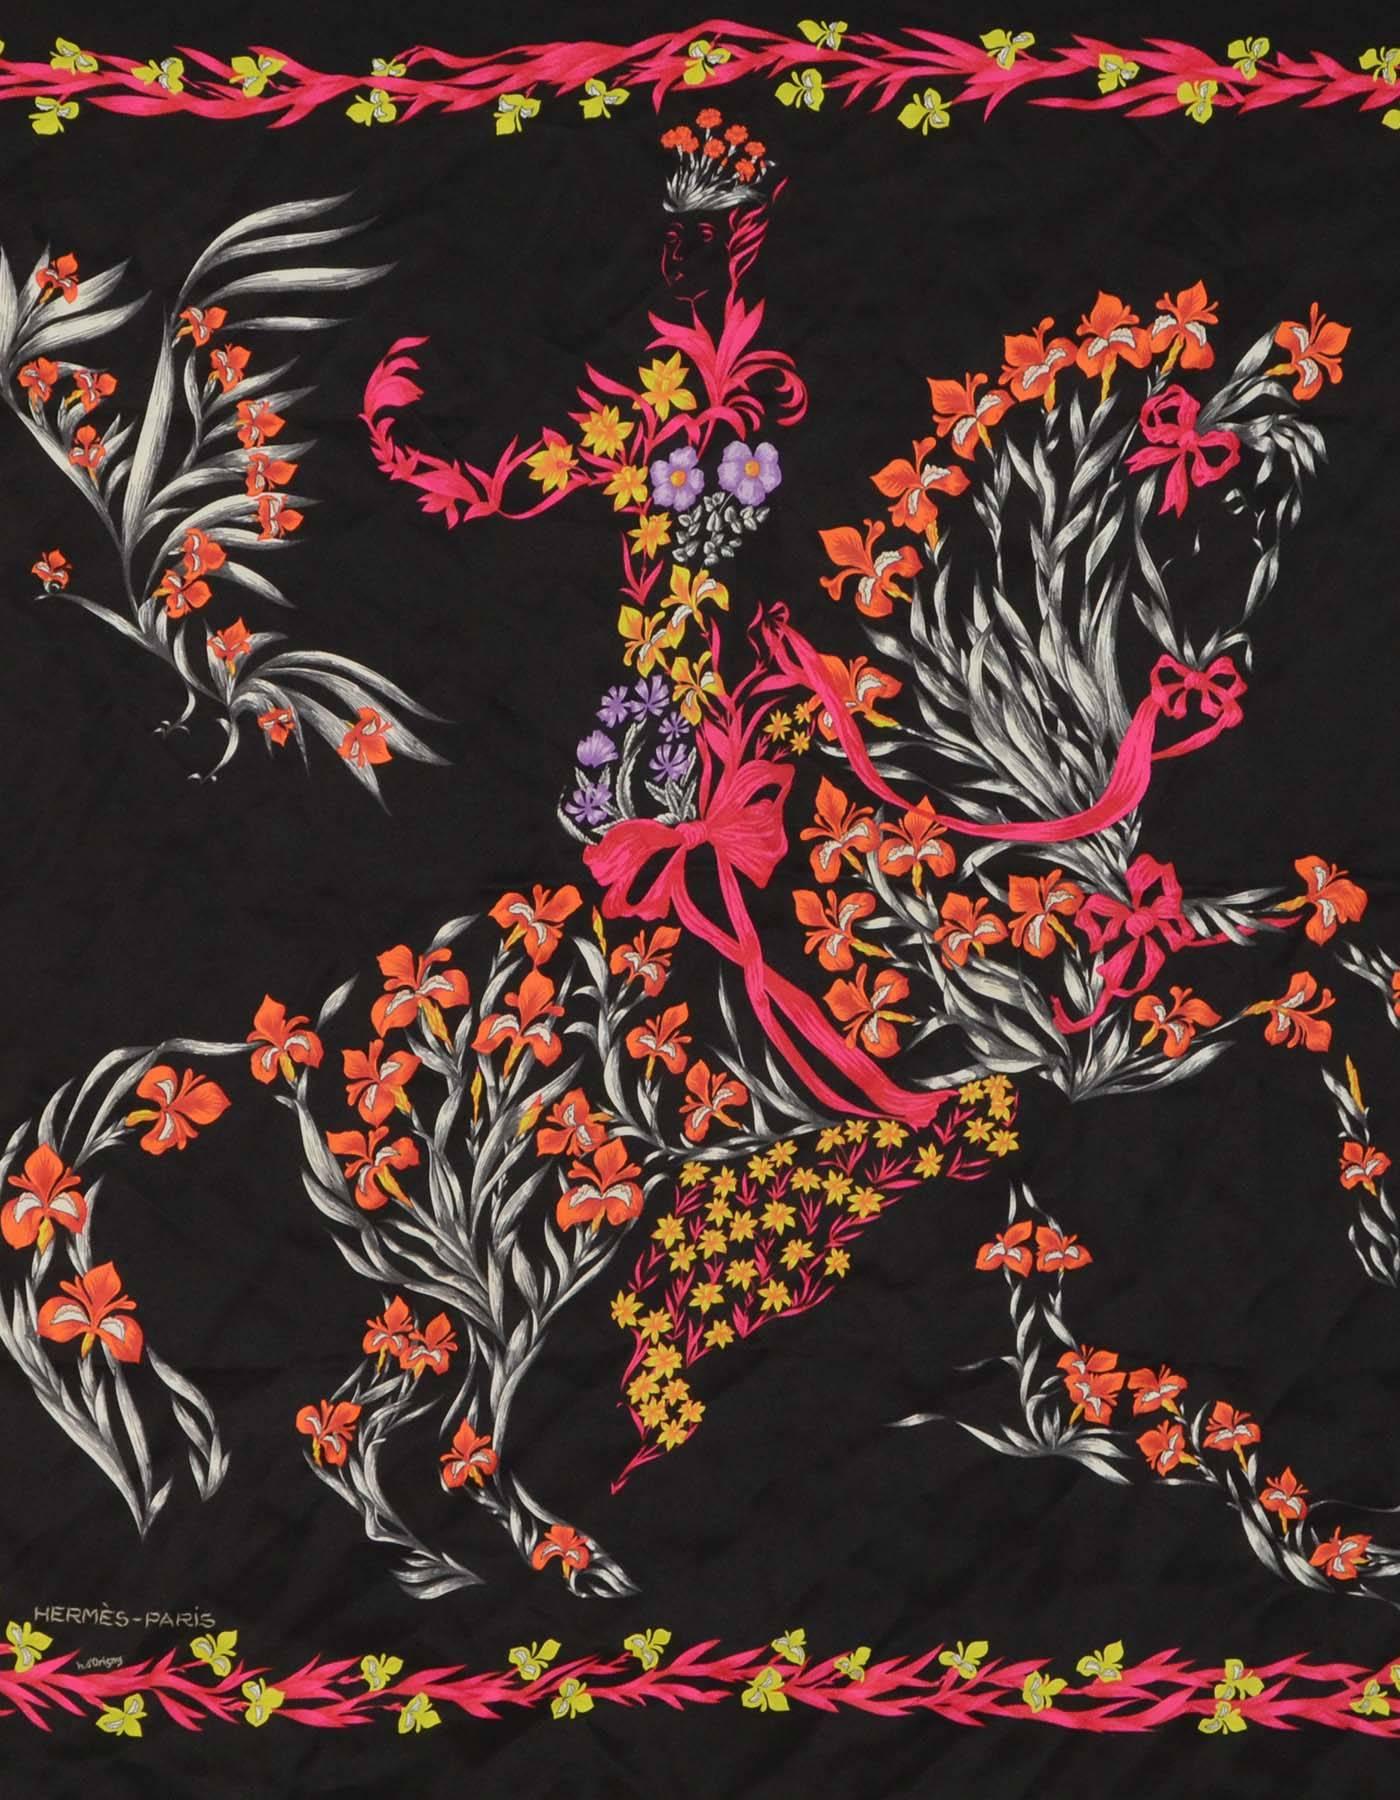 Hermes Black Floral Print 70cm Silk Scarf
Features a horse floral print design 
Made in: France
Color: Black, pink, white and multi- colored
Composition: 100% Silk
Overall Condition: Excellent pre-owned condition 
Measurements:
Length: